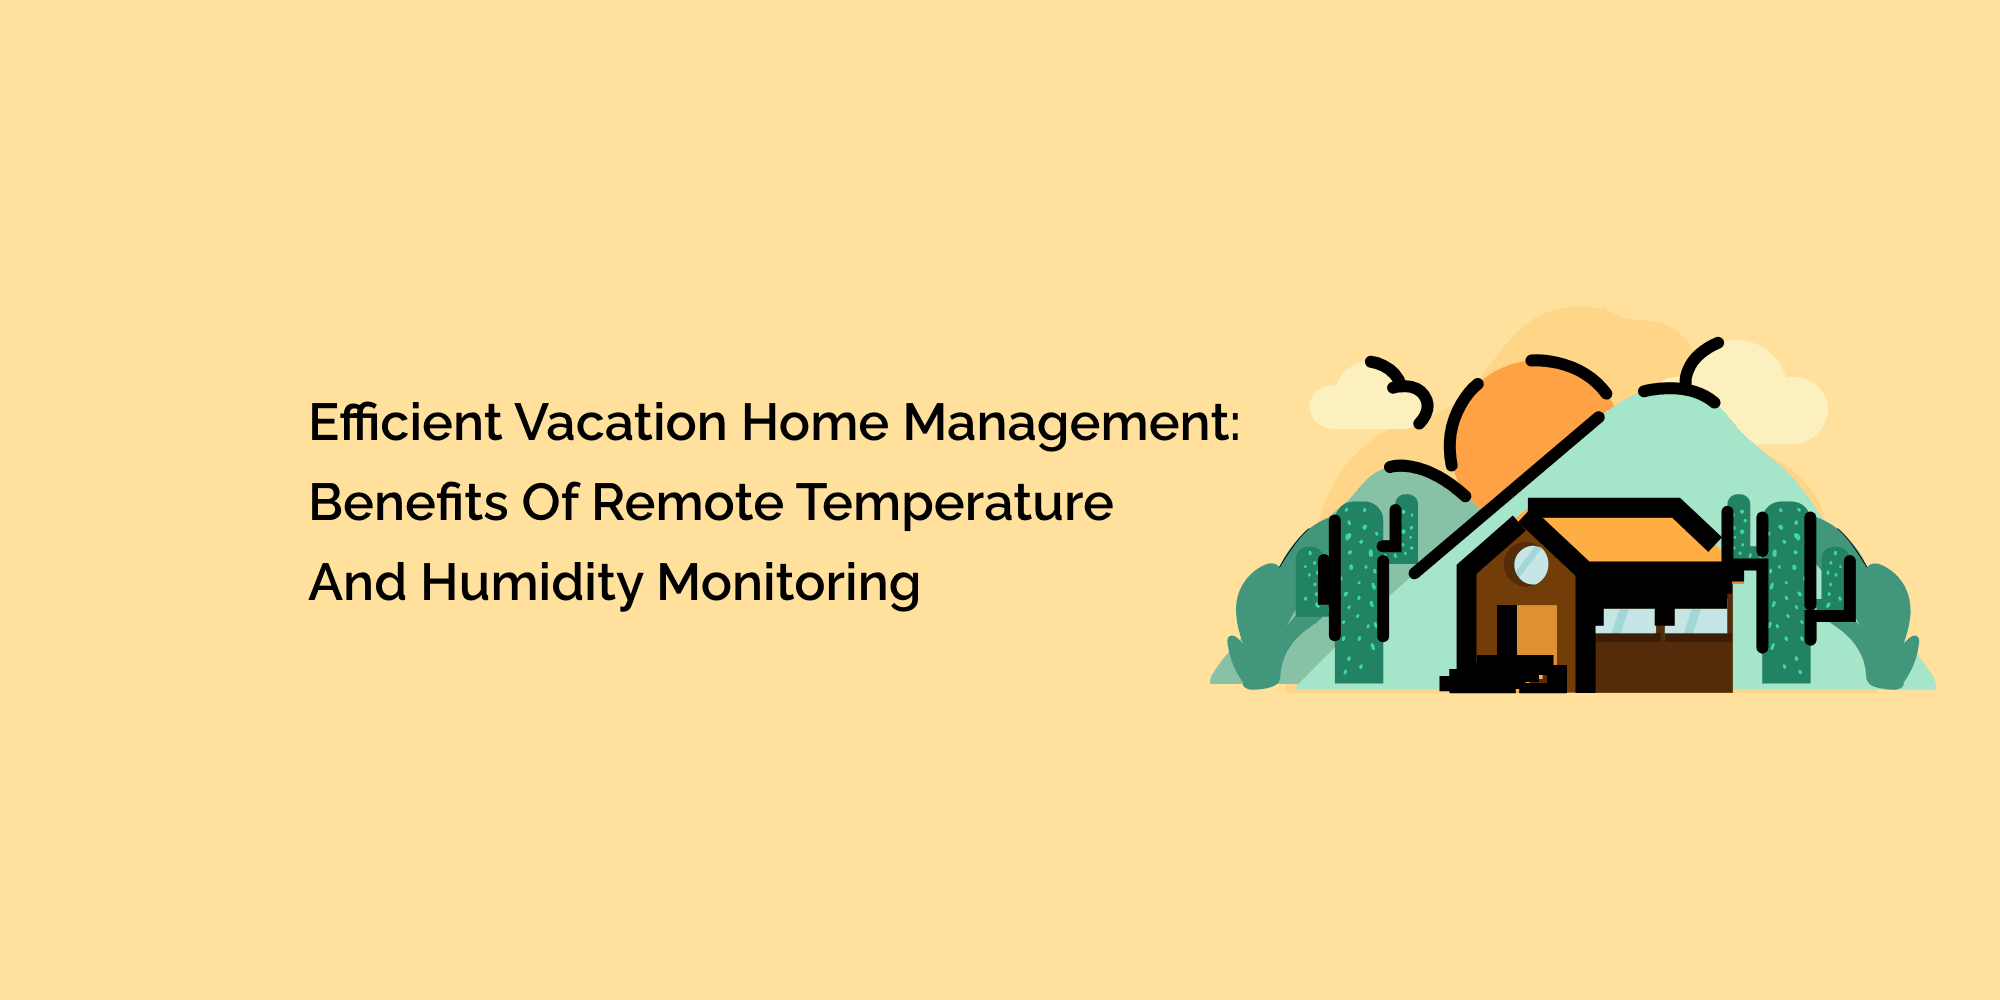 Efficient Vacation Home Management: Benefits of Remote Temperature and Humidity Monitoring